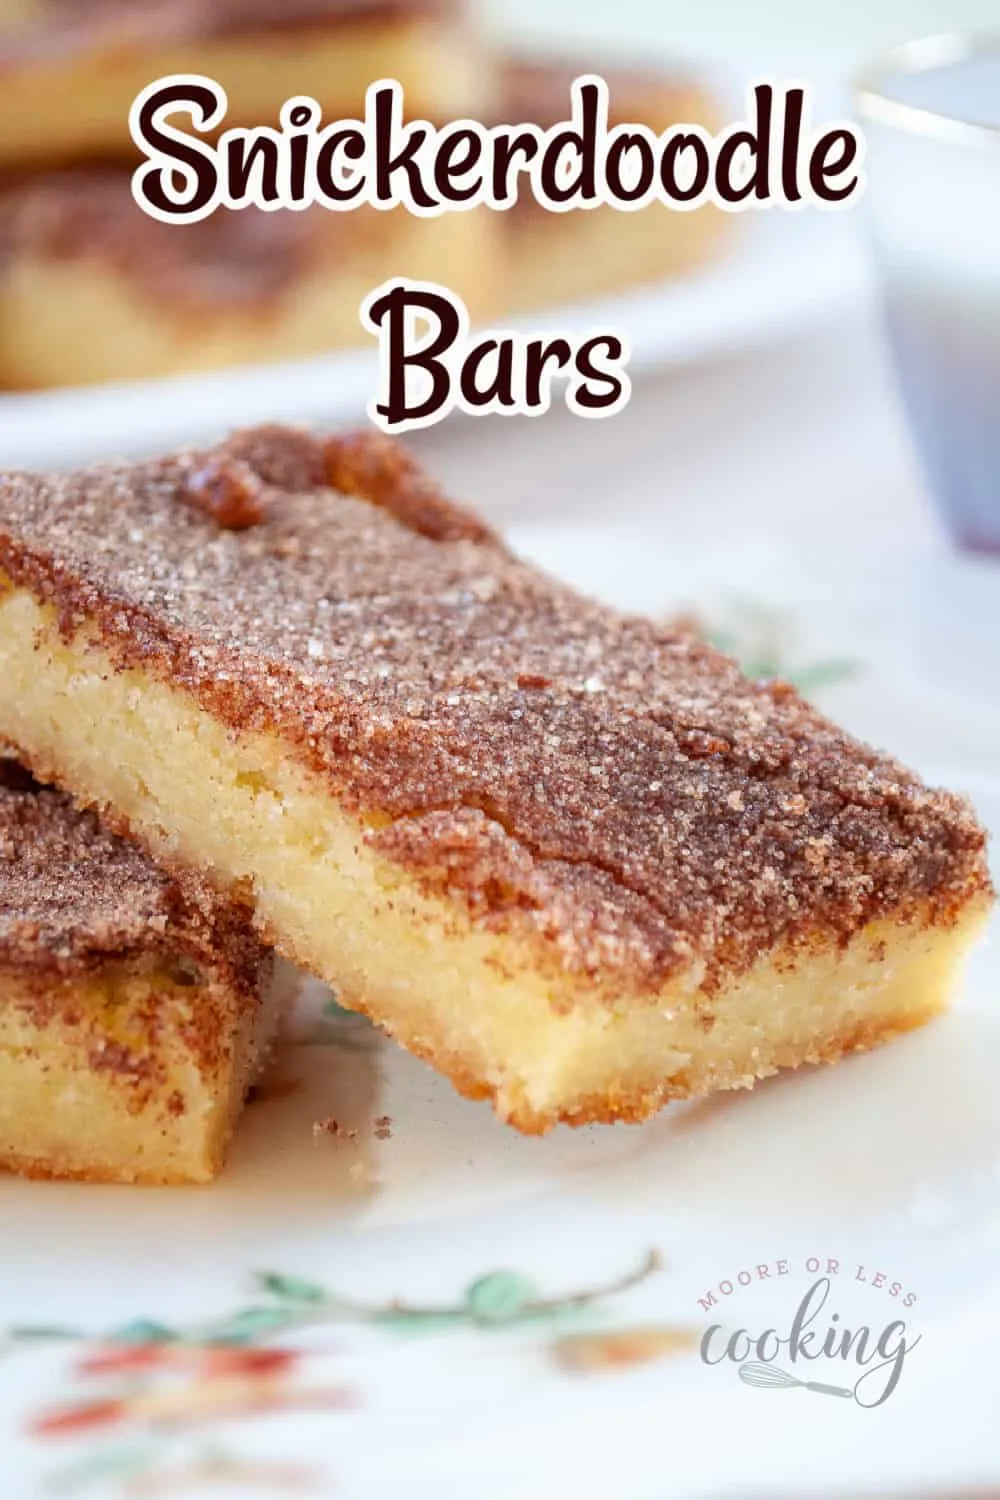 Snickerdoodle Bars. If you love snickerdoodle cookies, you’ll adore these easy to make snickerdoodle bars. They have that classic cinnamon and sugar flavor but in a blondie bar form, that’s buttery, soft, and chewy. via @Mooreorlesscook